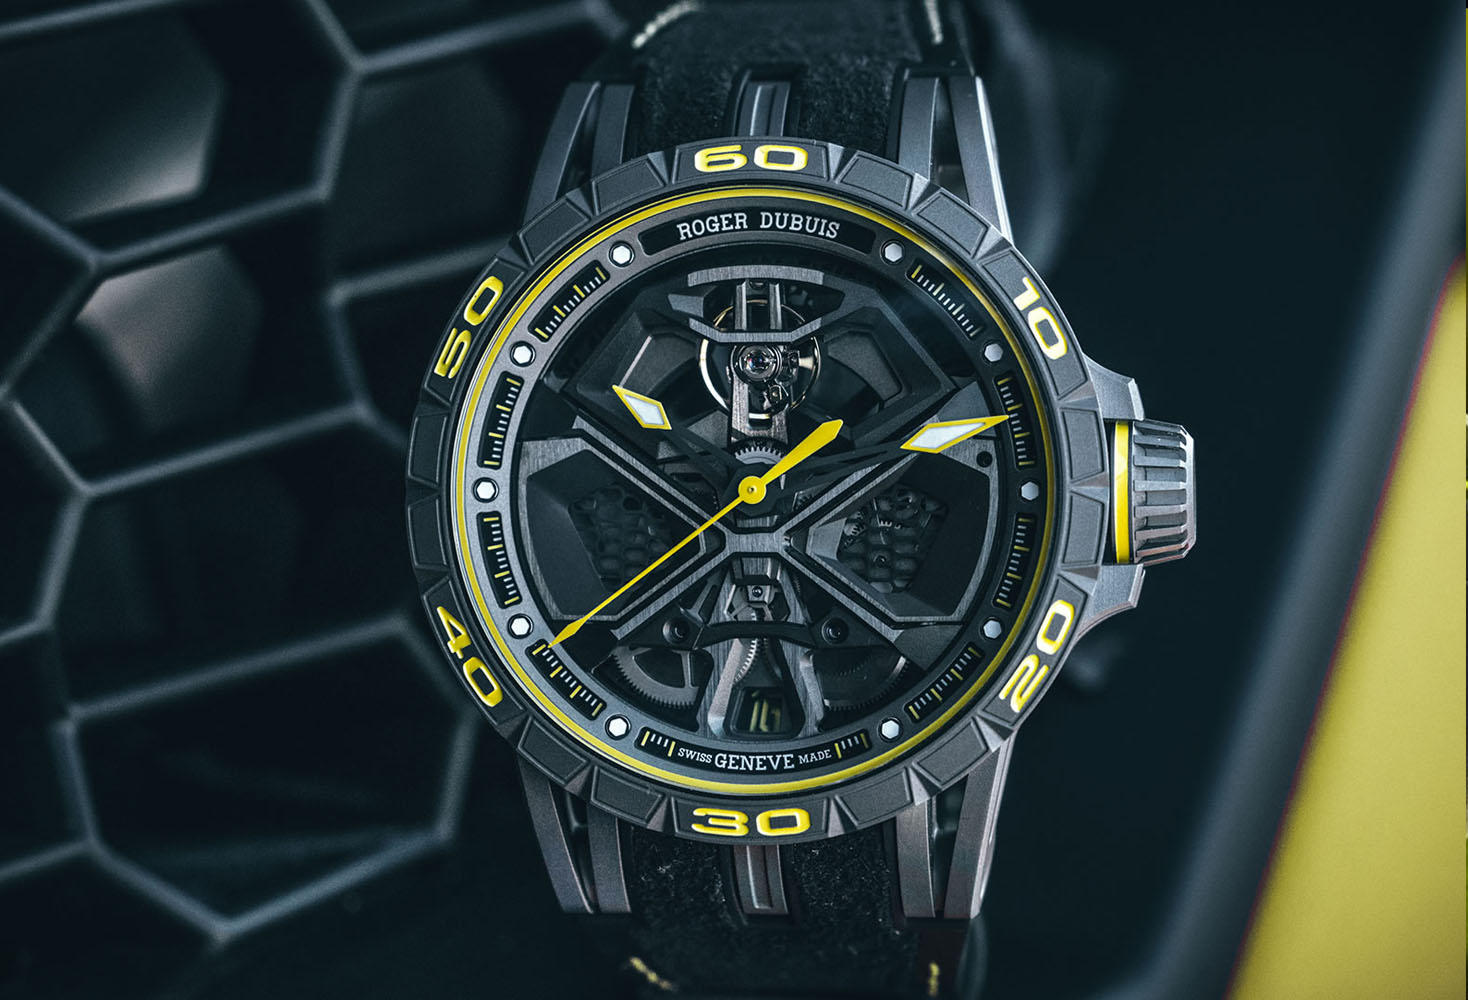 Excalibur Huracán Performante:Best Watches Of SIHH 2019